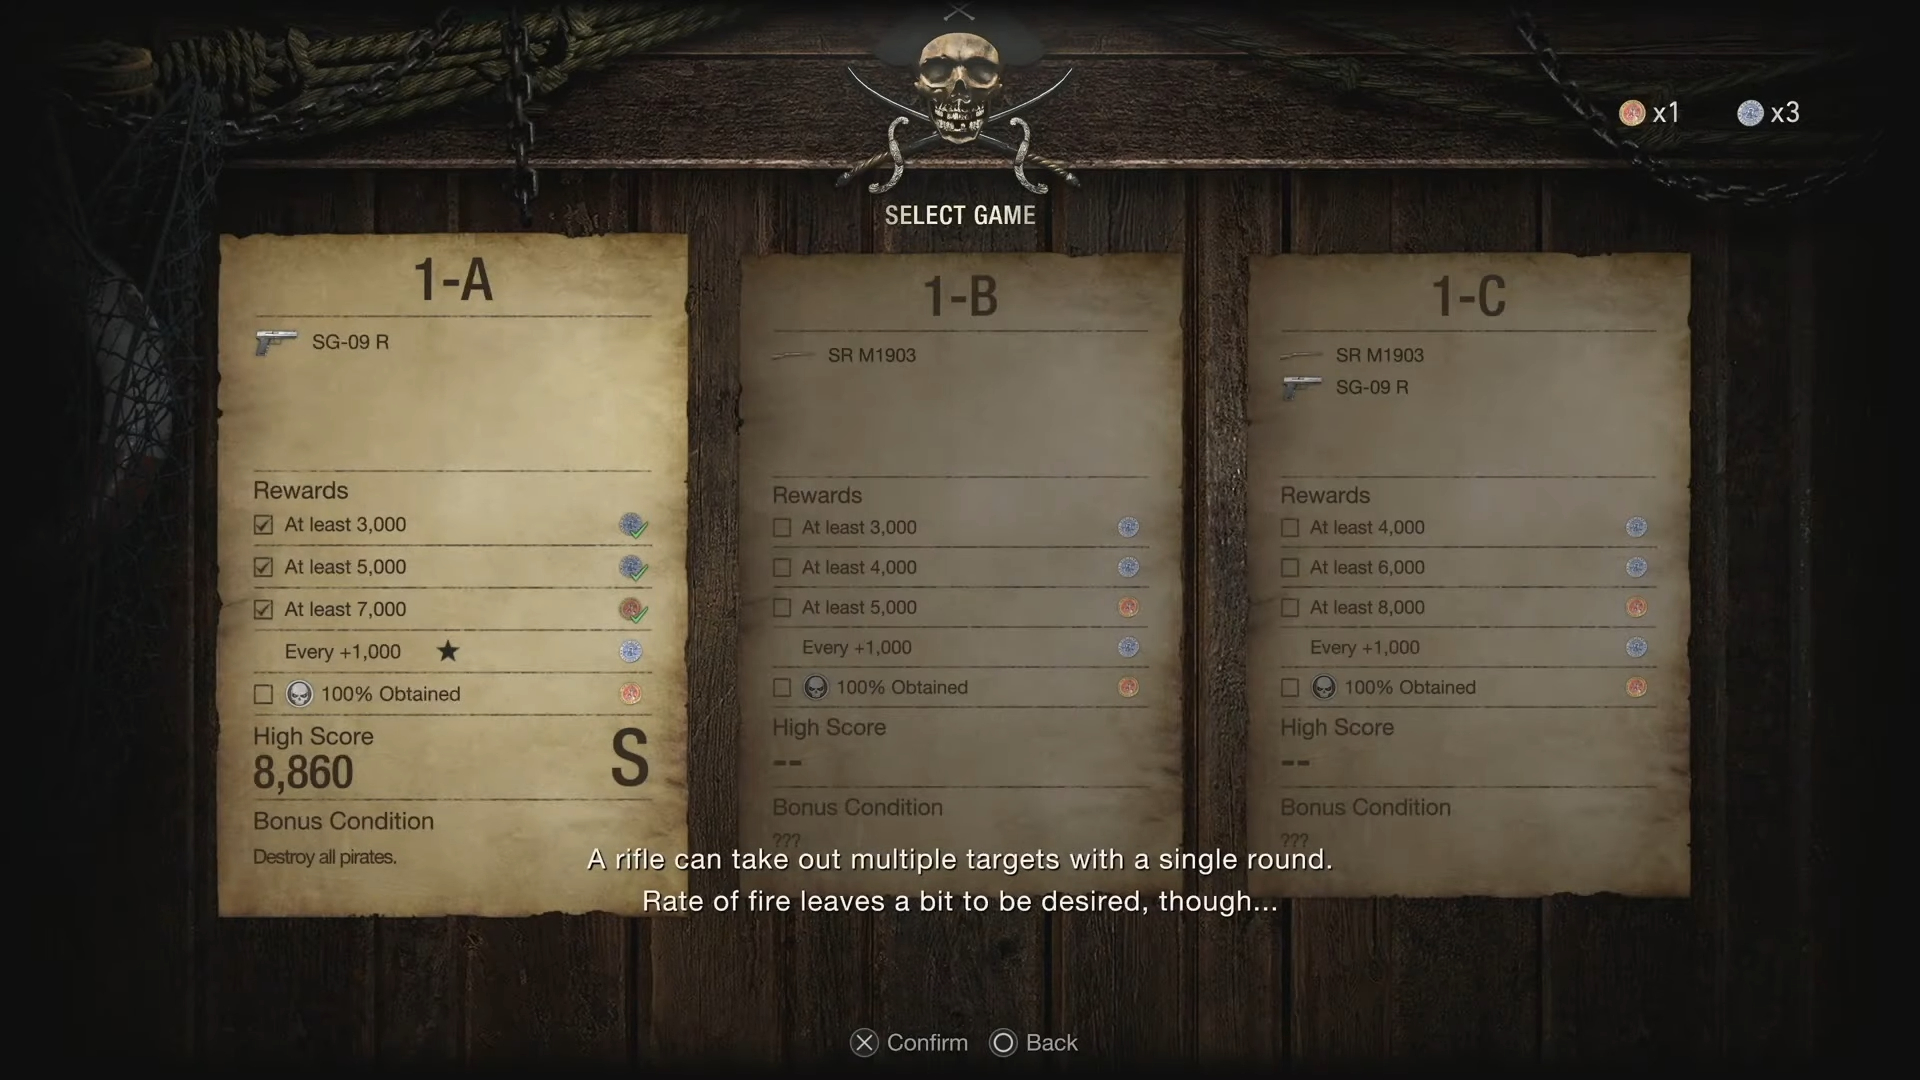 Resident Evil 4 shooting range: Locations, scores, and charms list